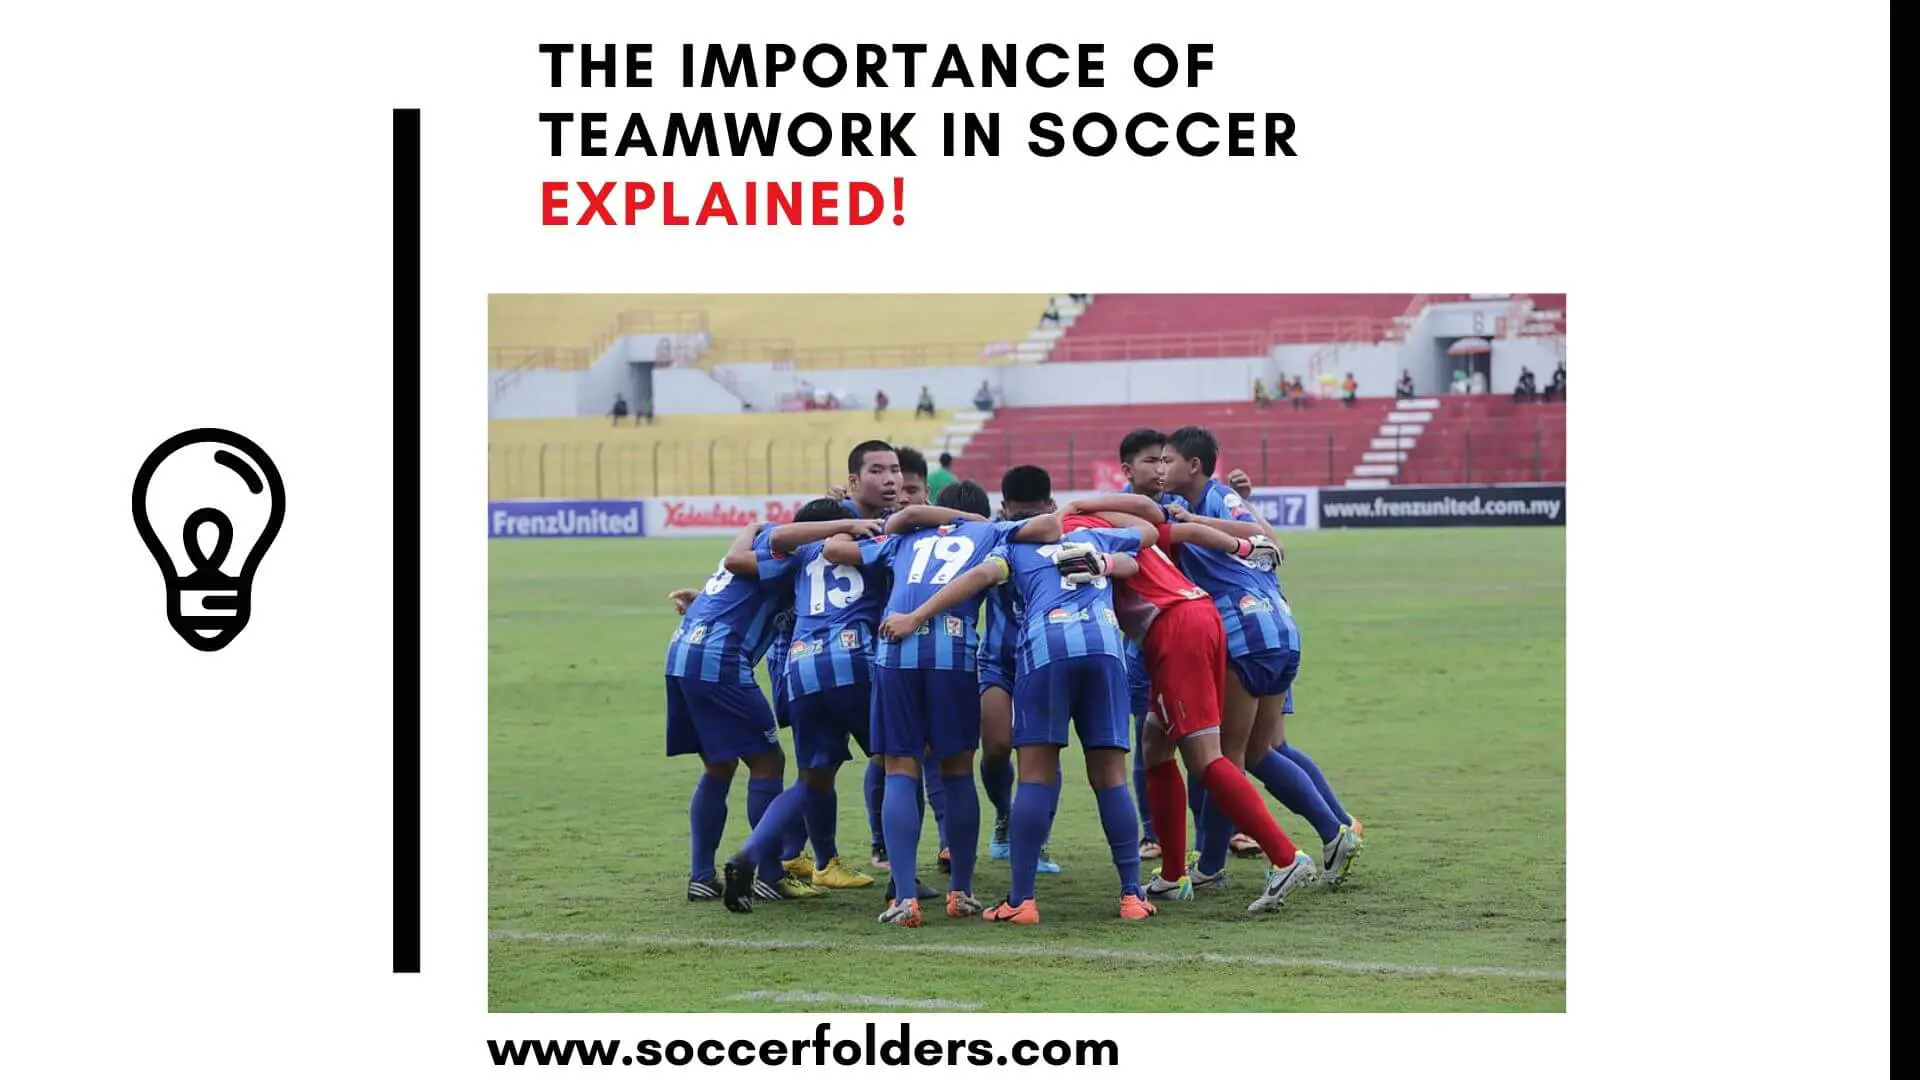 The importance of teamwork in soccer - Featured image